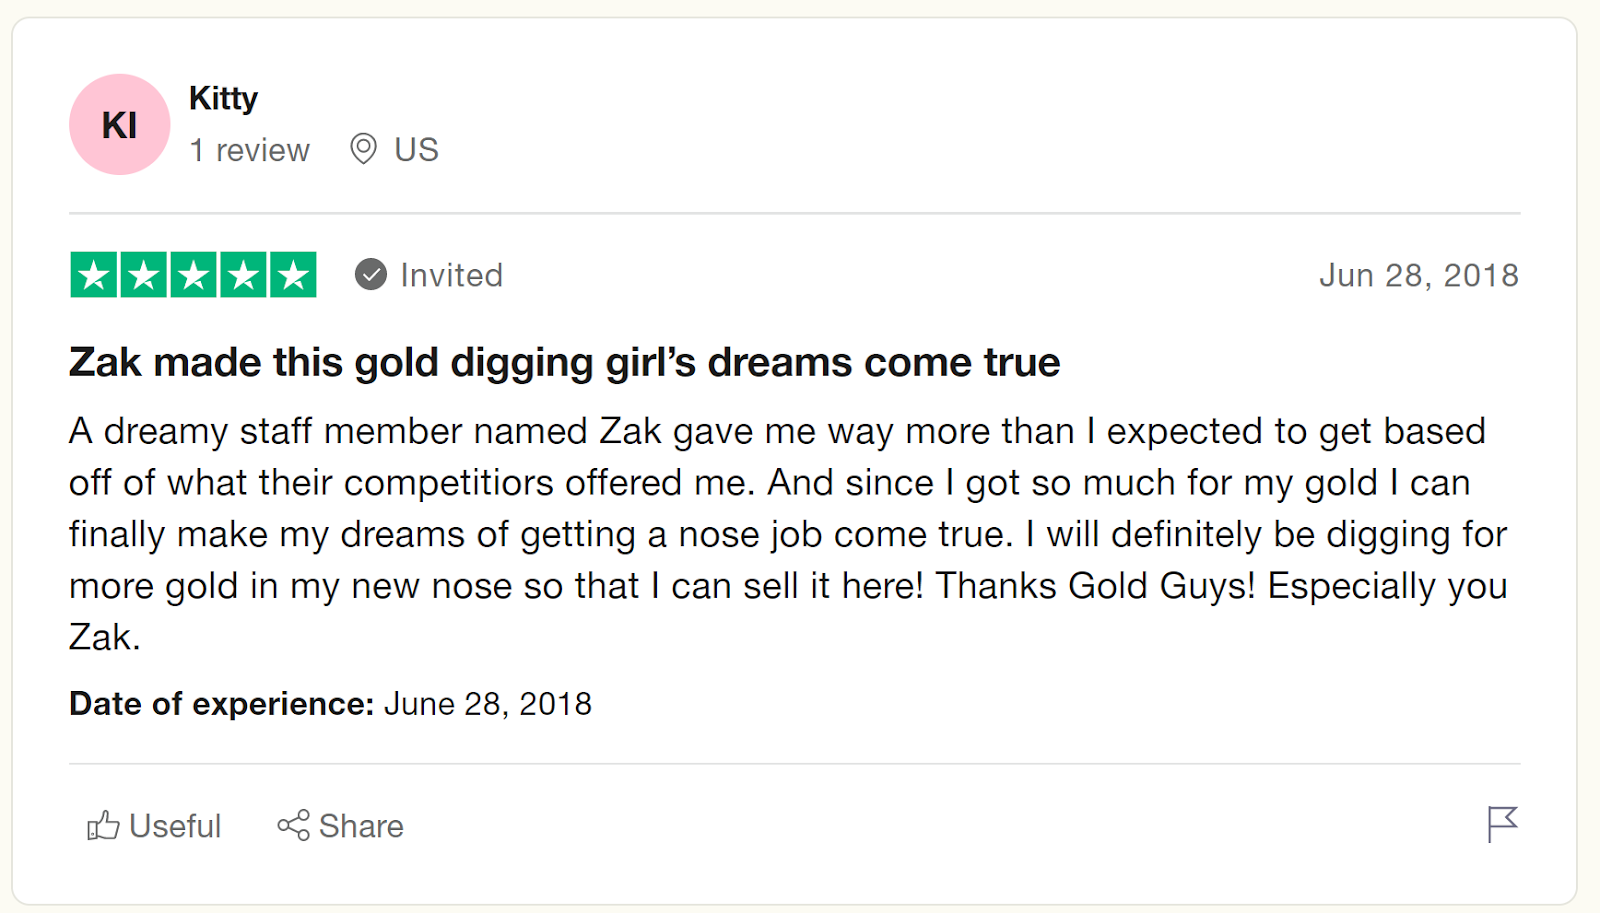 The Gold Guys reviews